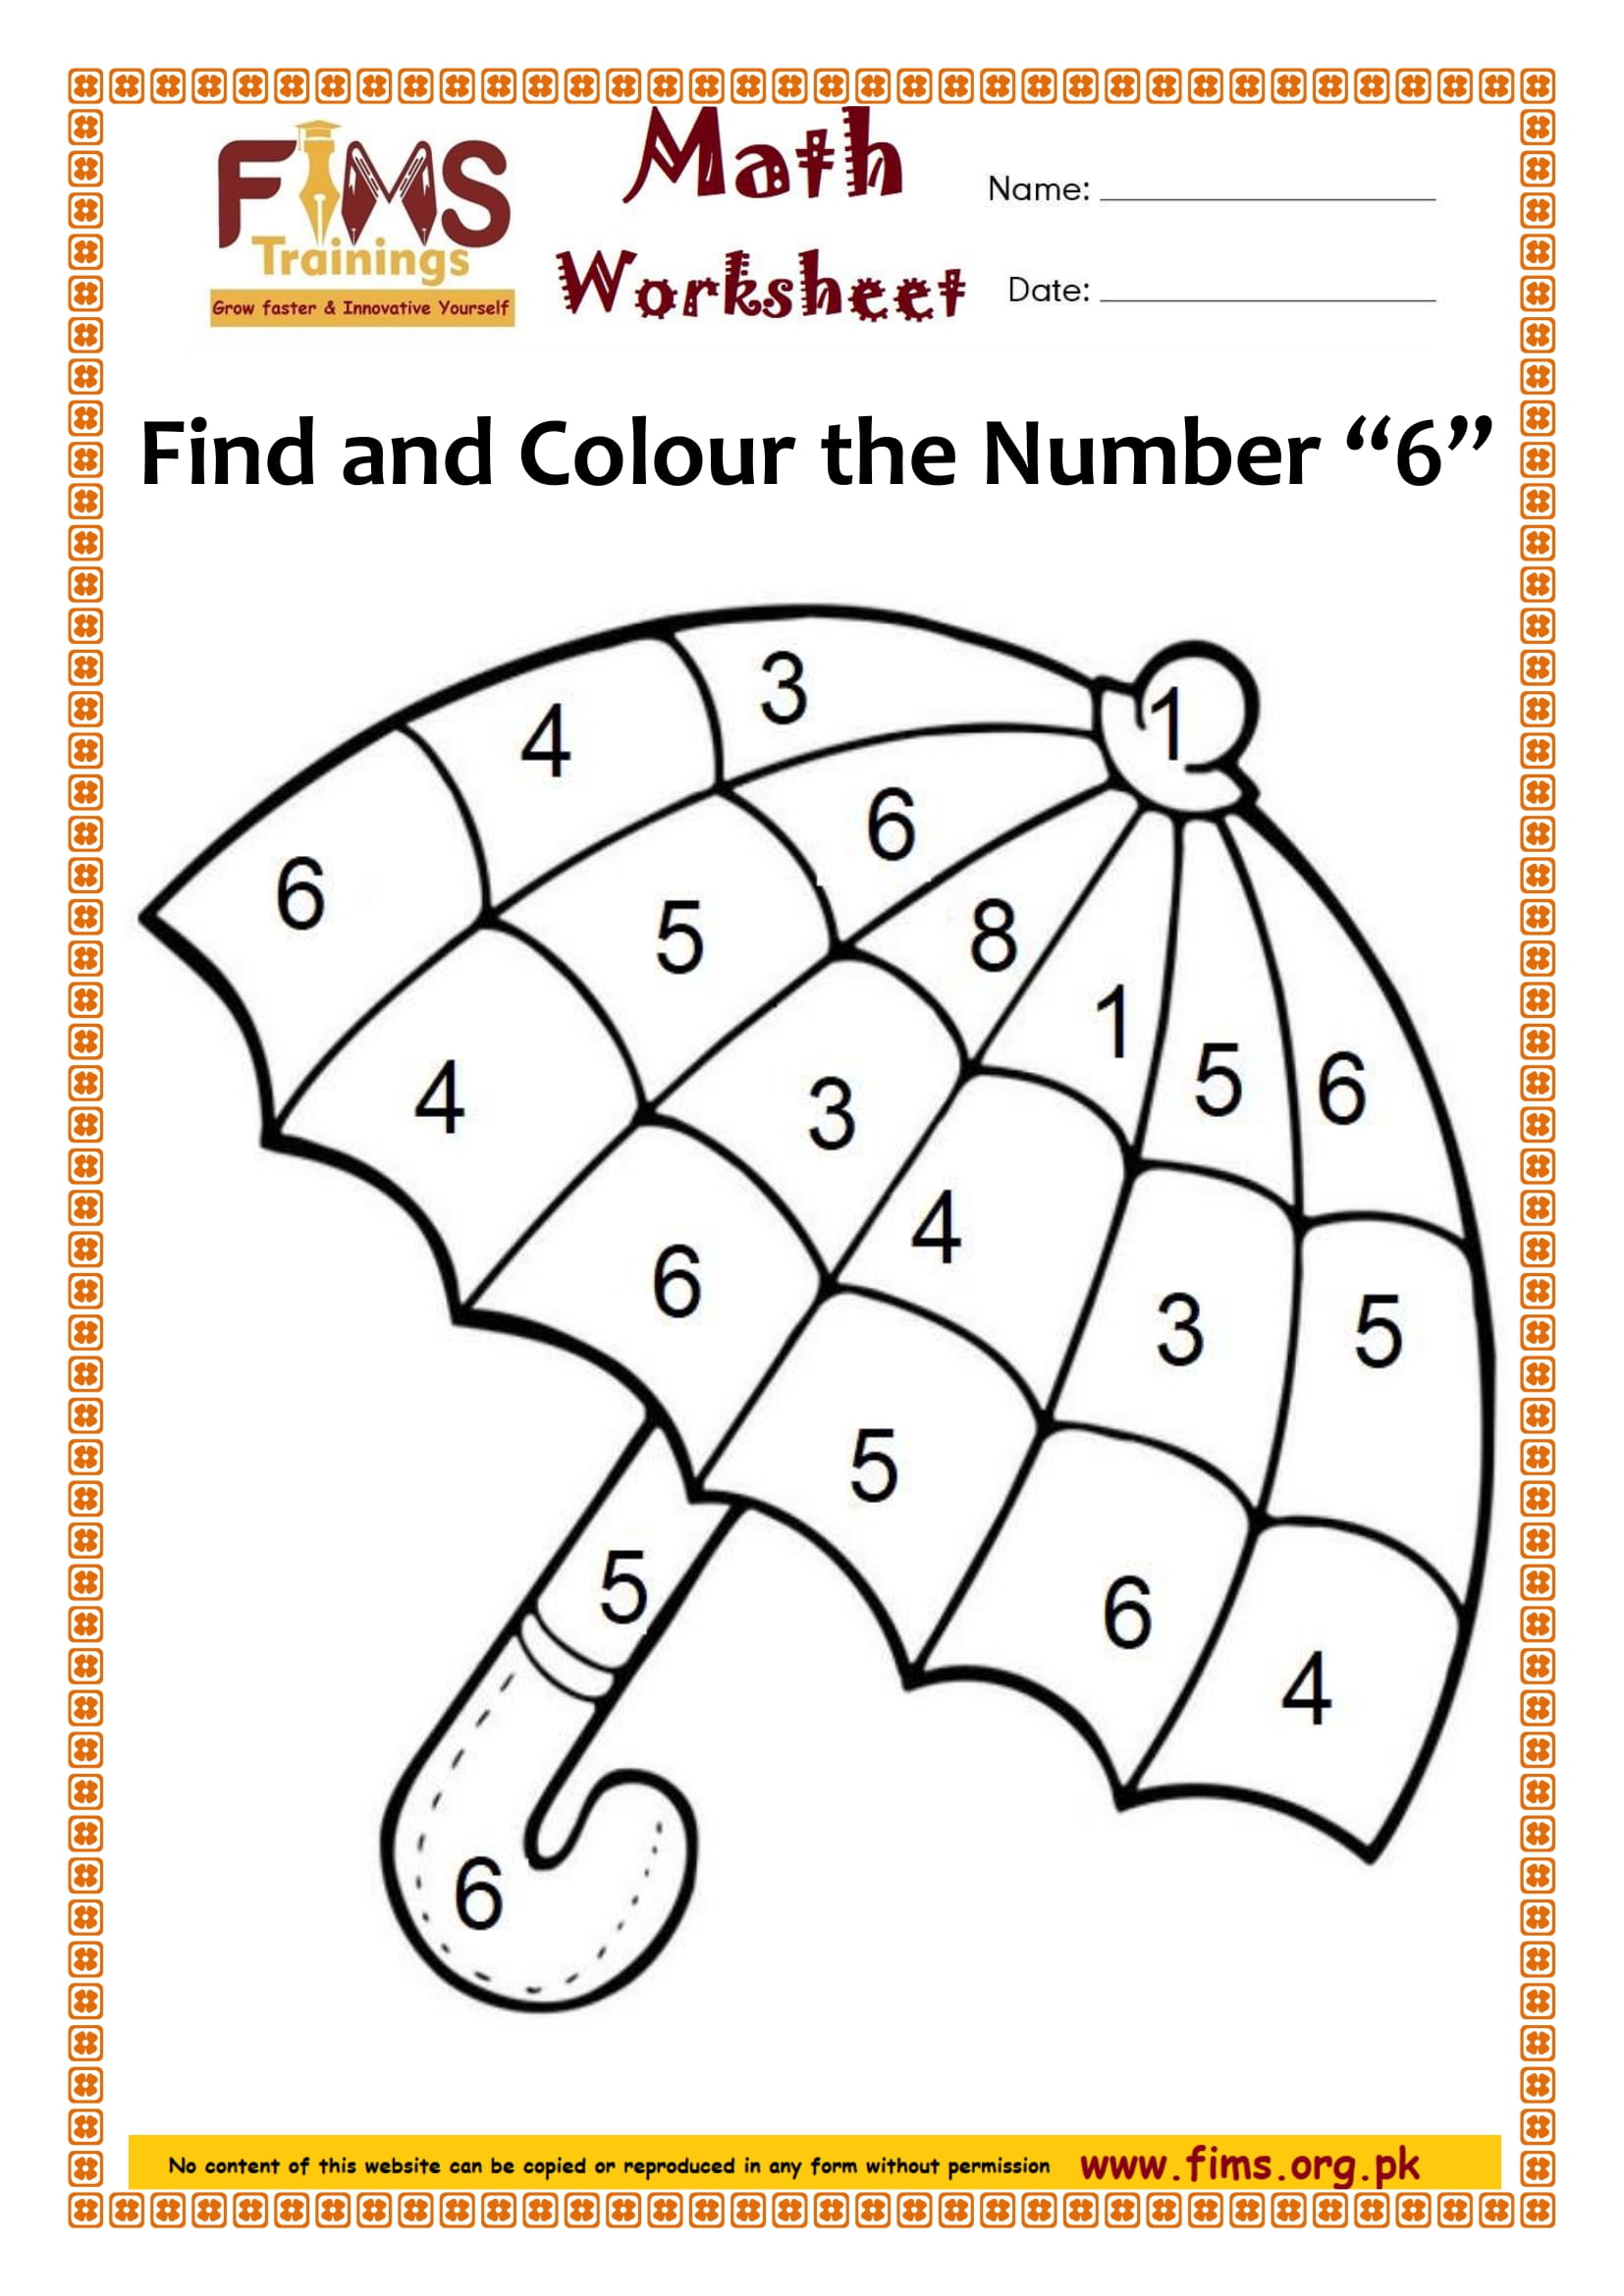 find-and-colour-the-number-6-free-printable-worksheets-download-pdf